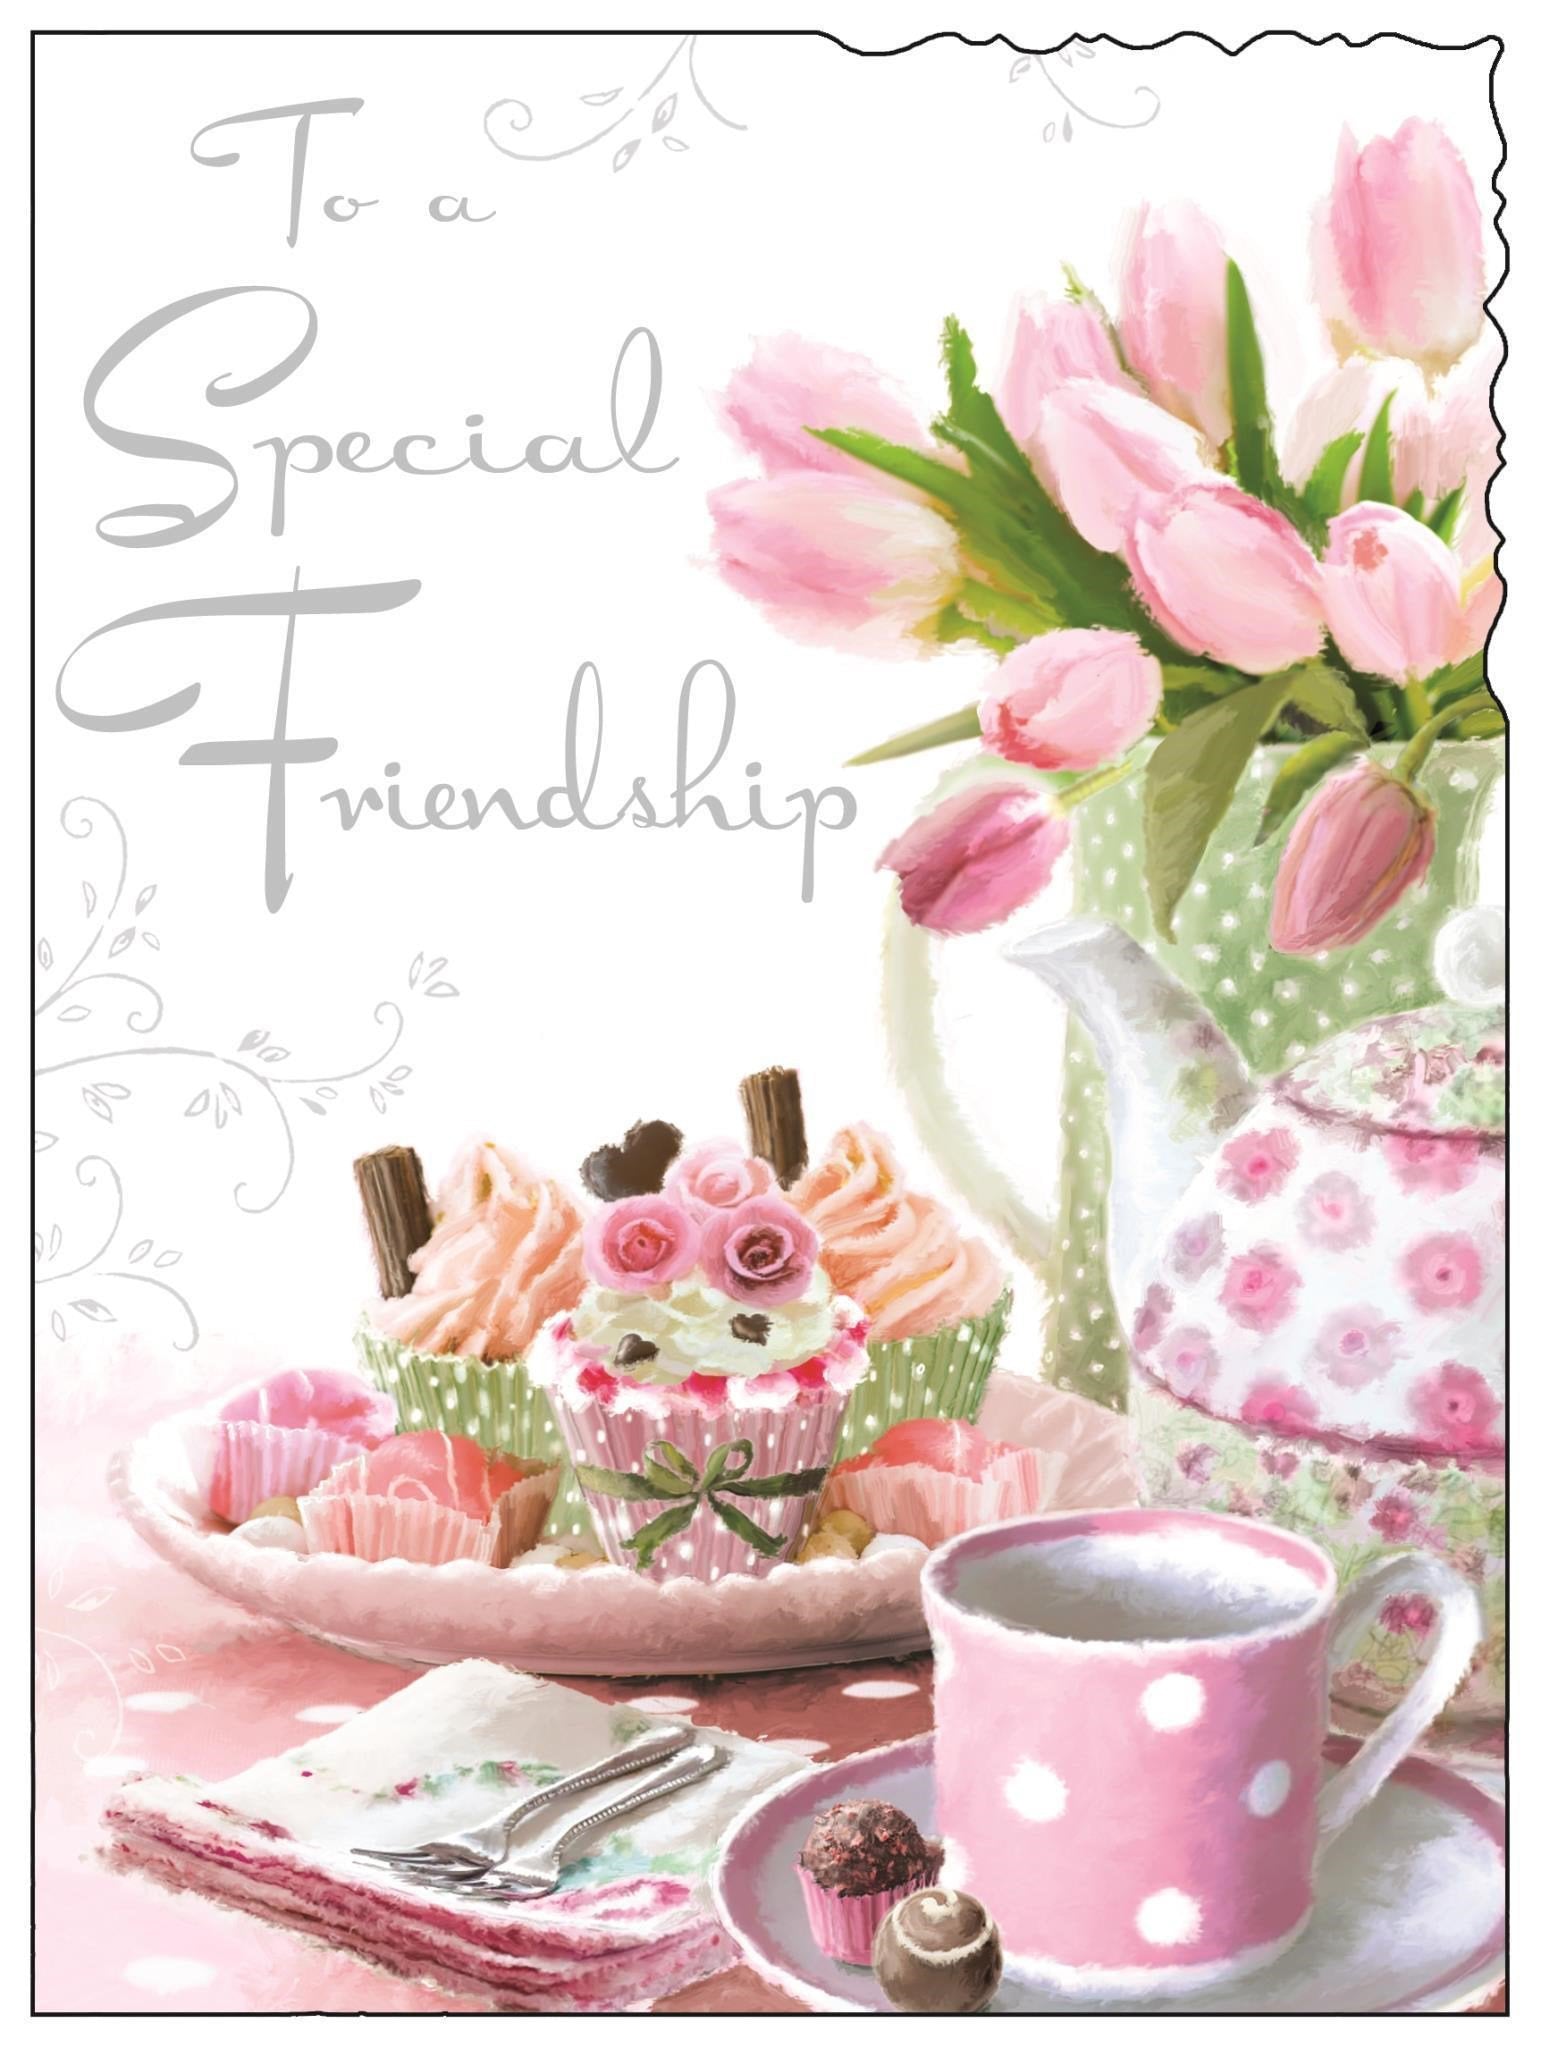 Front of To Friendship Cakes Greetings Card